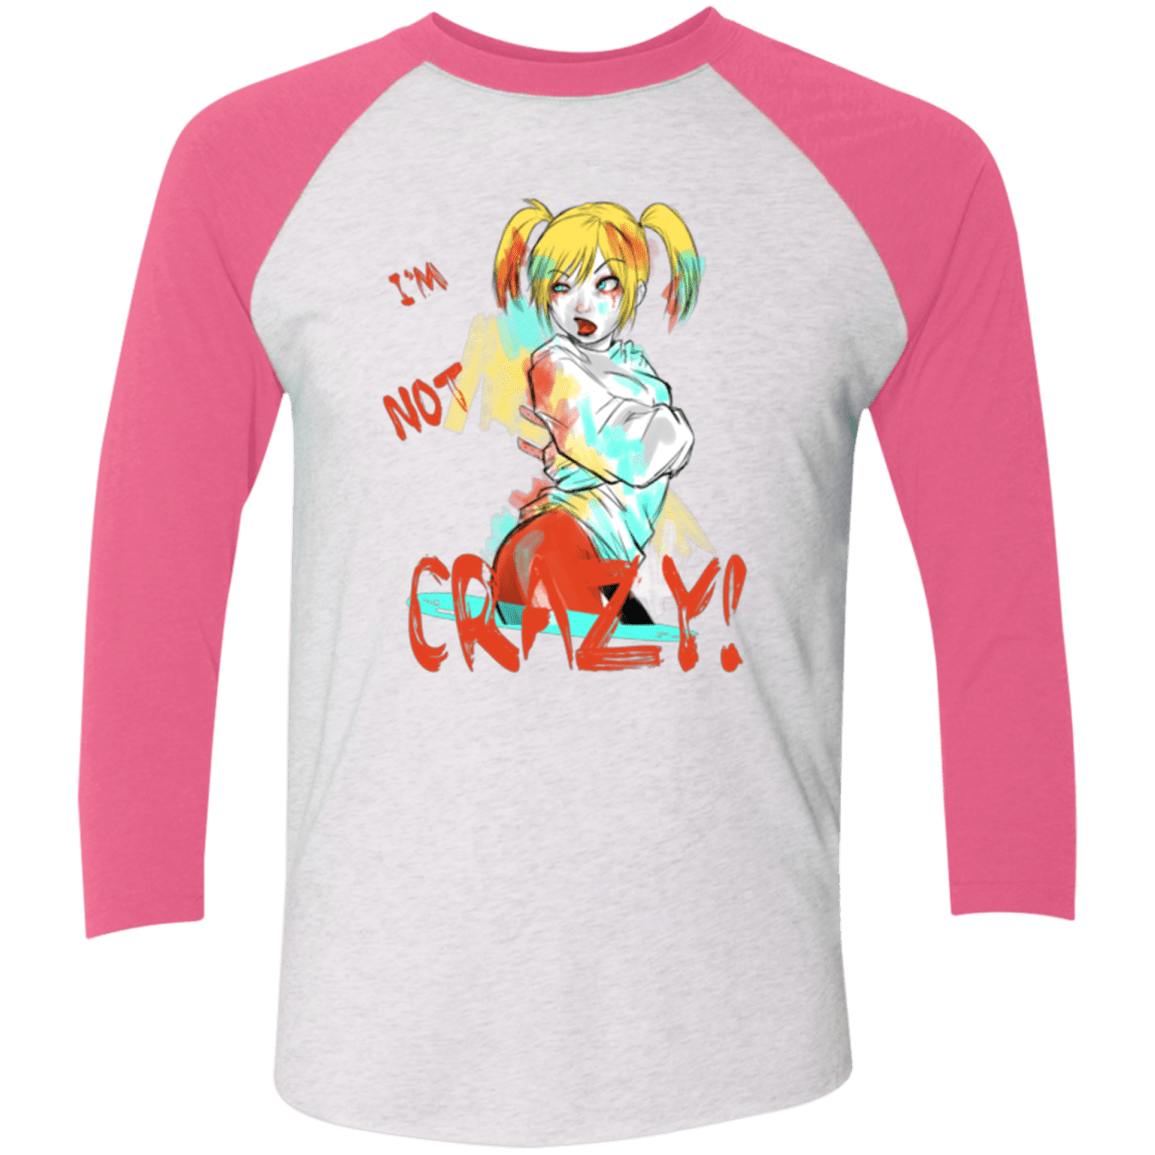 T-Shirts Heather White/Vintage Pink / X-Small I'm not crazy! Triblend 3/4 Sleeve